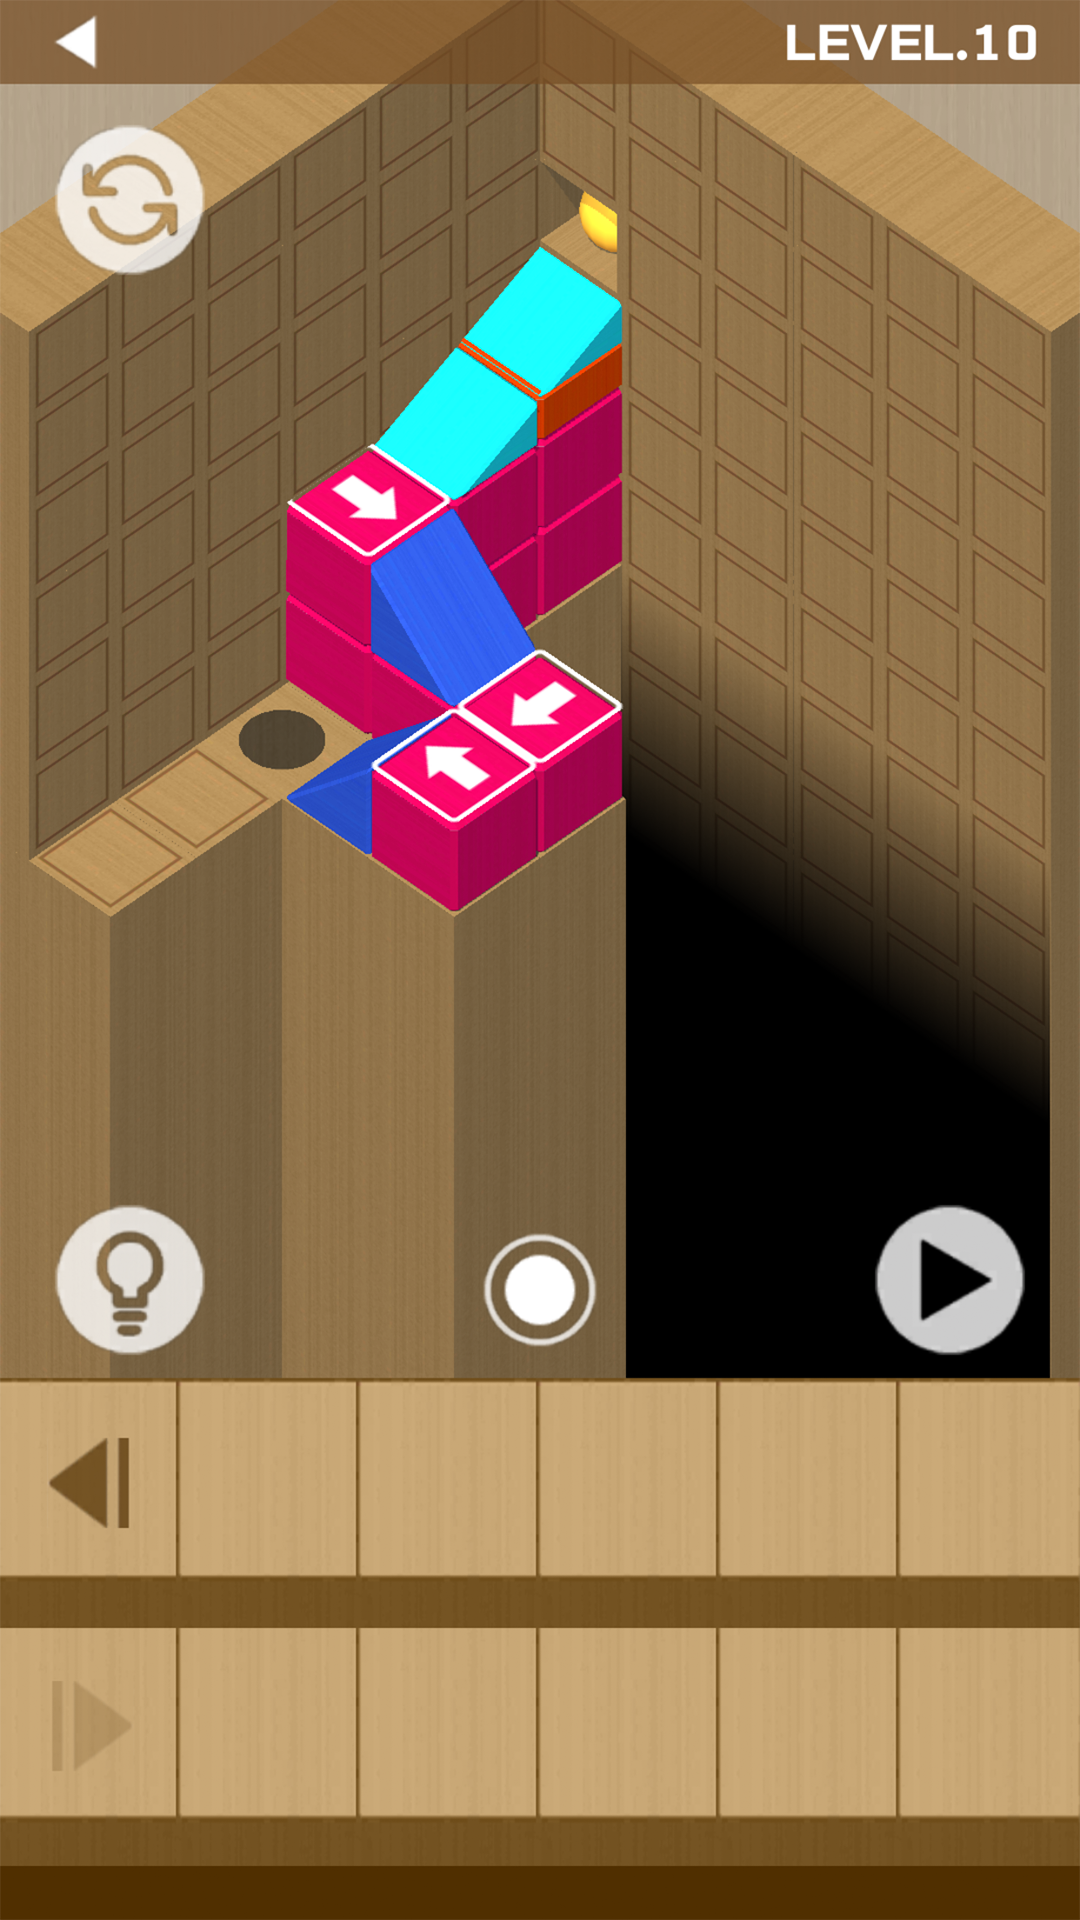 Screenshot 1 of Woody Bricks and Ball Puzzles - Block-Puzzle-Spiel 1.3.13